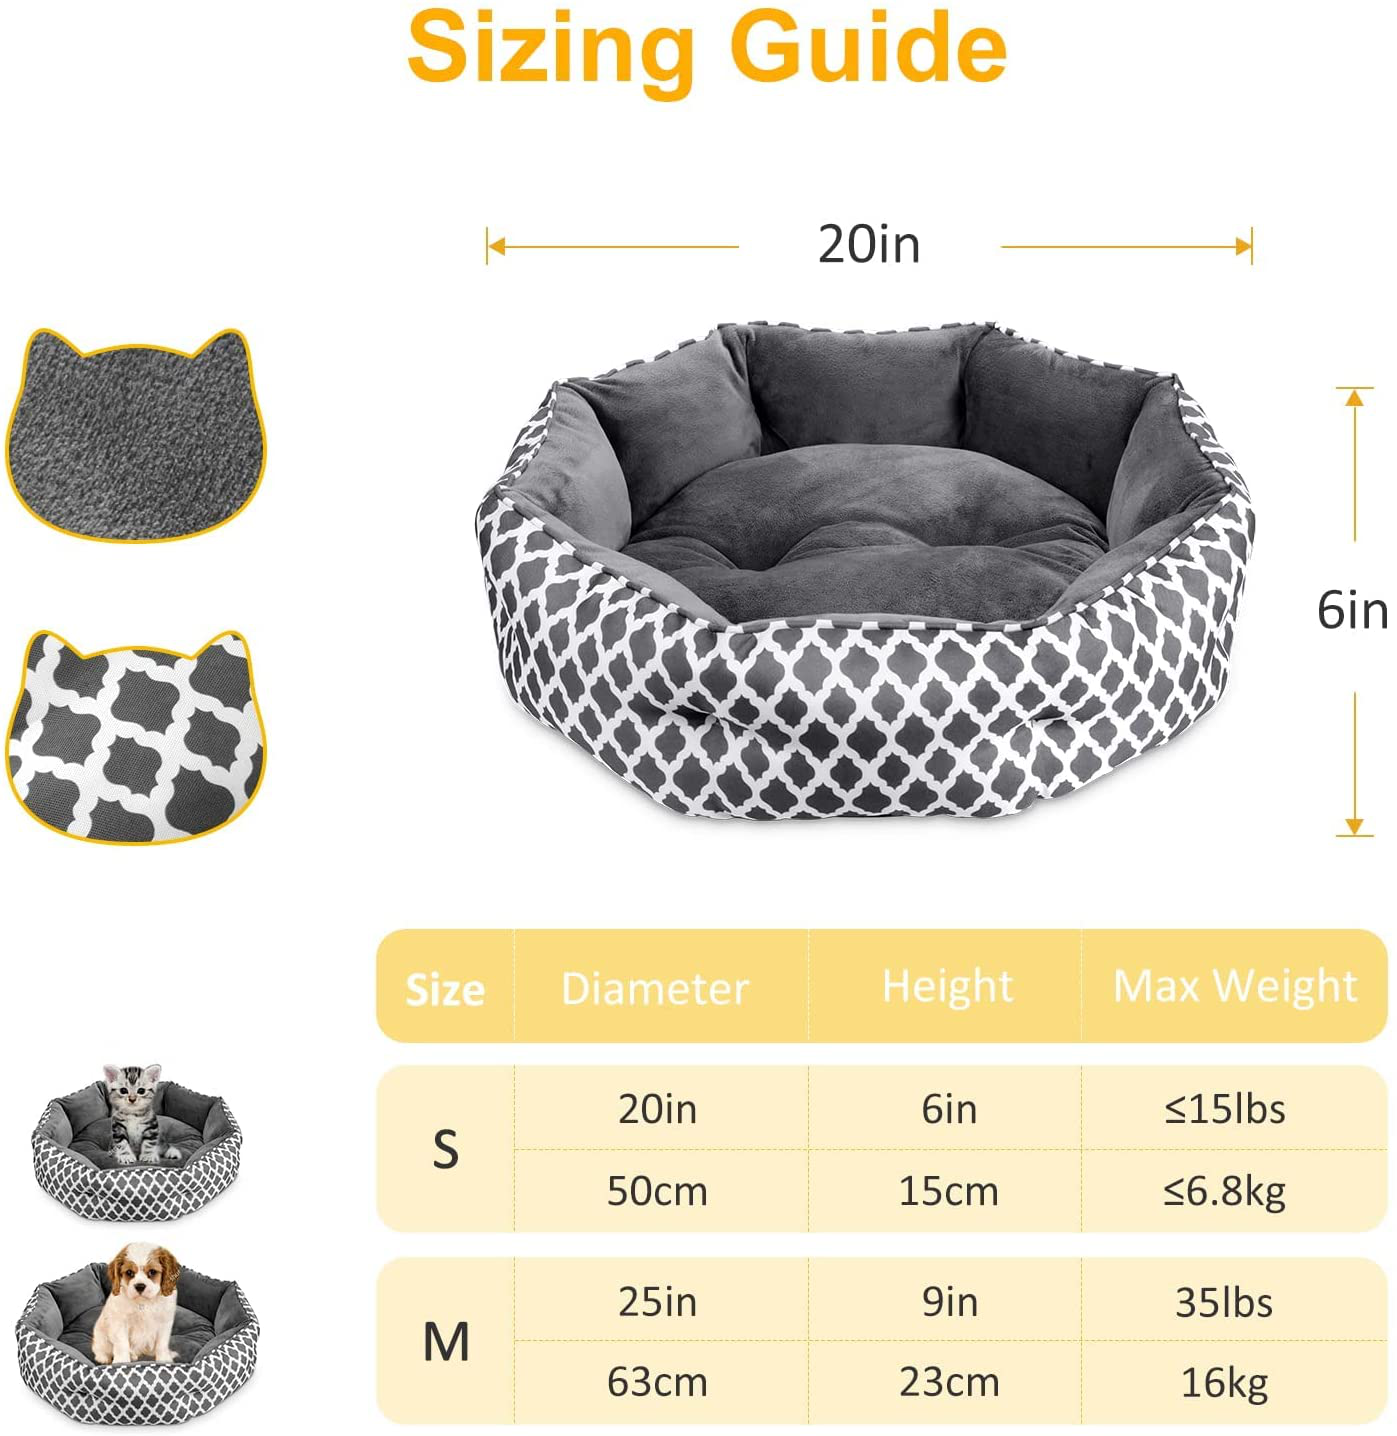 JOYO Cat Bed for Indoor Cat, 20 Inch Cat Bed Machine Washable with Waterproof Non-Slip Bottom, Double-Sided Kitten Plush Cushion Bed for Small Dogs, Soft Flannel round Warming Sofa Bed for Kitty Puppy Animals & Pet Supplies > Pet Supplies > Cat Supplies > Cat Beds JOYO   